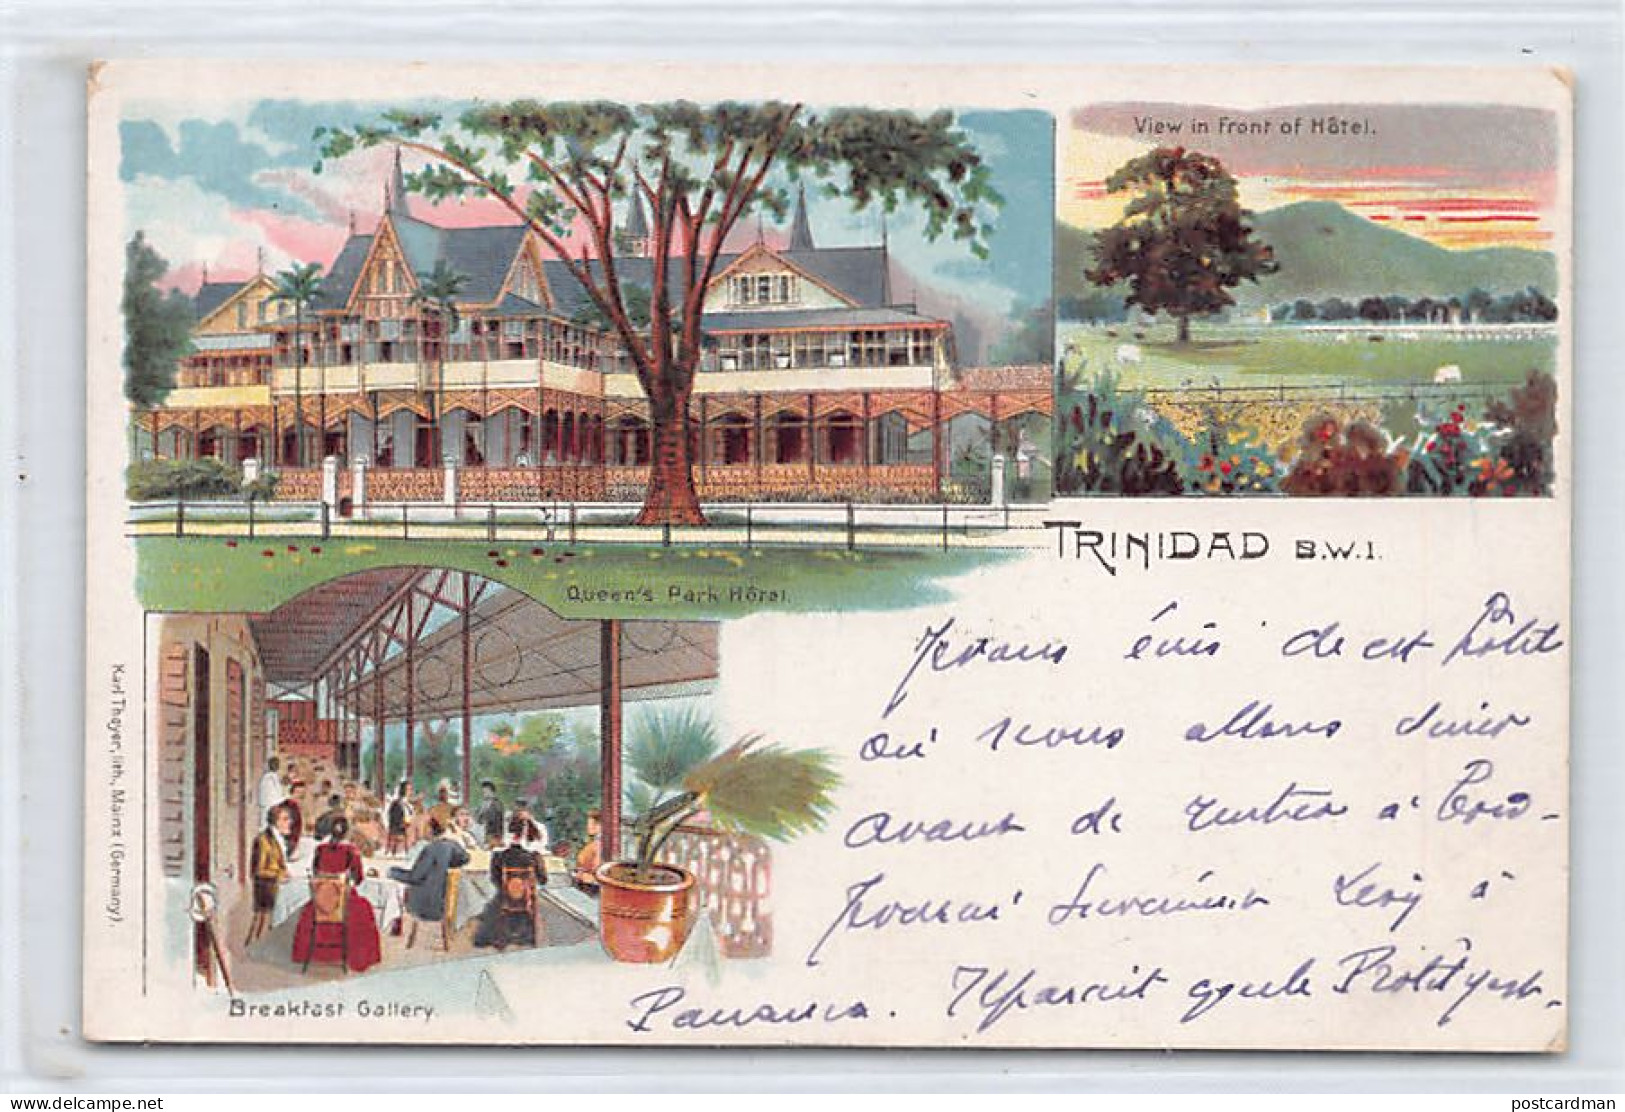 Trinidad - LITHO - Queen's Park Hotel - View In Front Of Hotel - Breakfast Gallery - Publ. Karl Theyer  - Trinidad